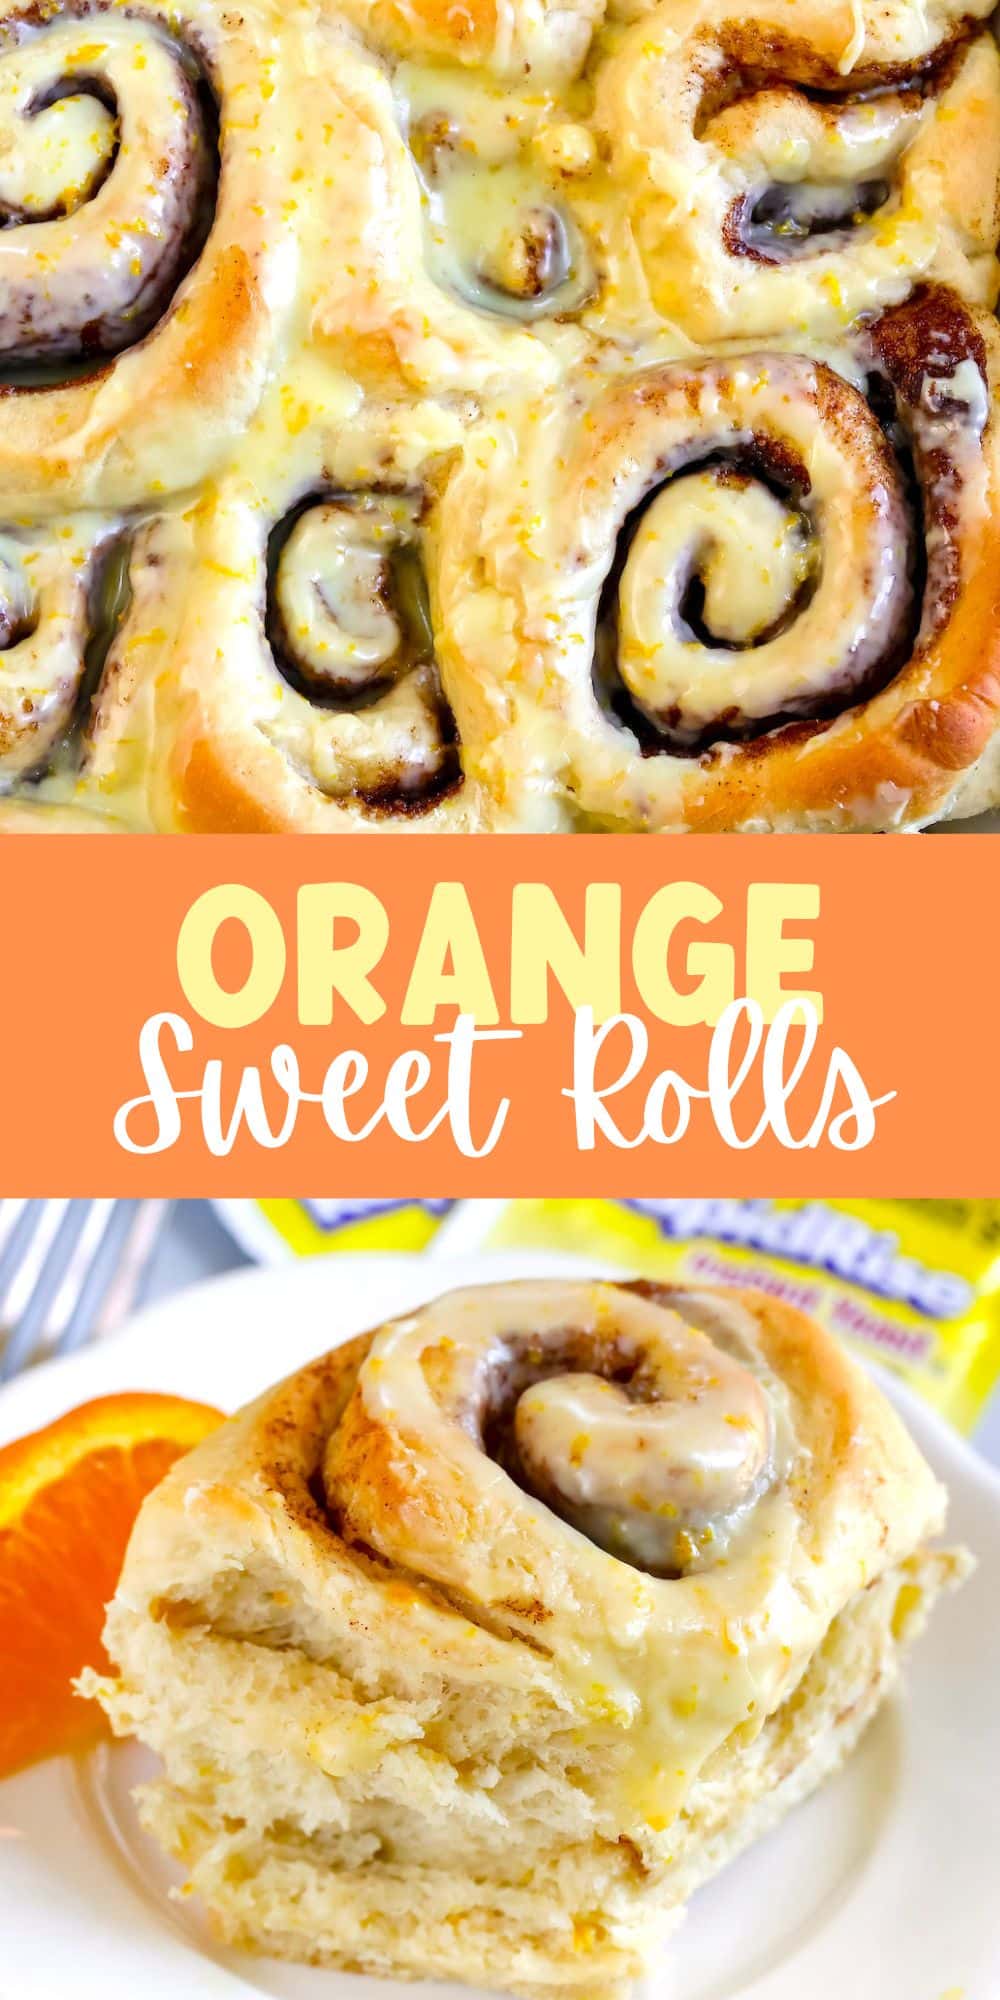 two photos of the sweet rolls with words in the middle of the image